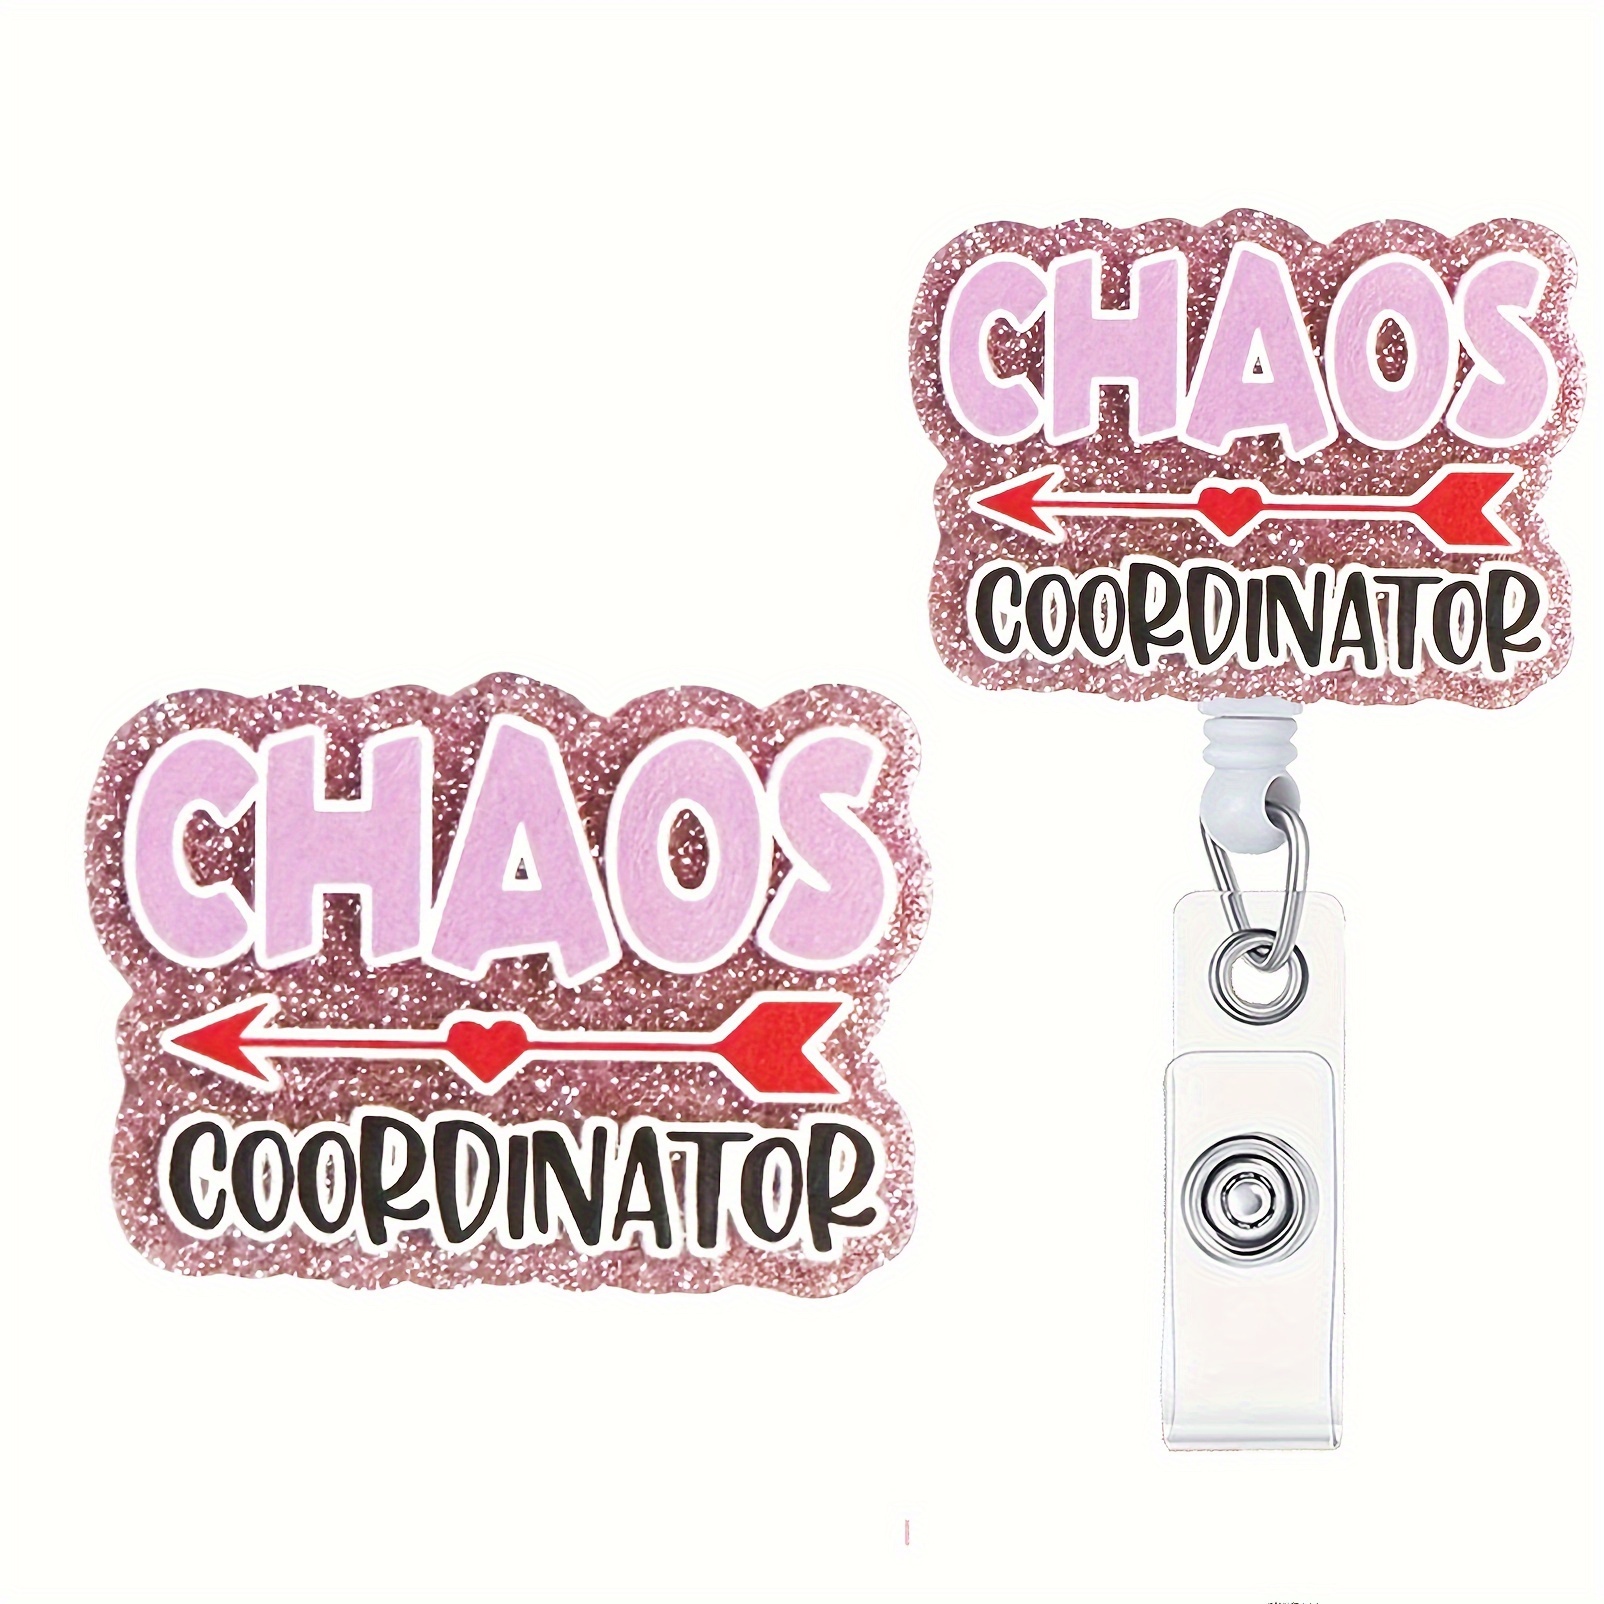 

1pc Nurse Retractable Badge Reel With Clip Chaos Coordinator Id Badge Holder Cute Badge Funny Glitter Badge Reel Gift For Rn Lpn Cna Nurse Doctor Assistant Medical Staff